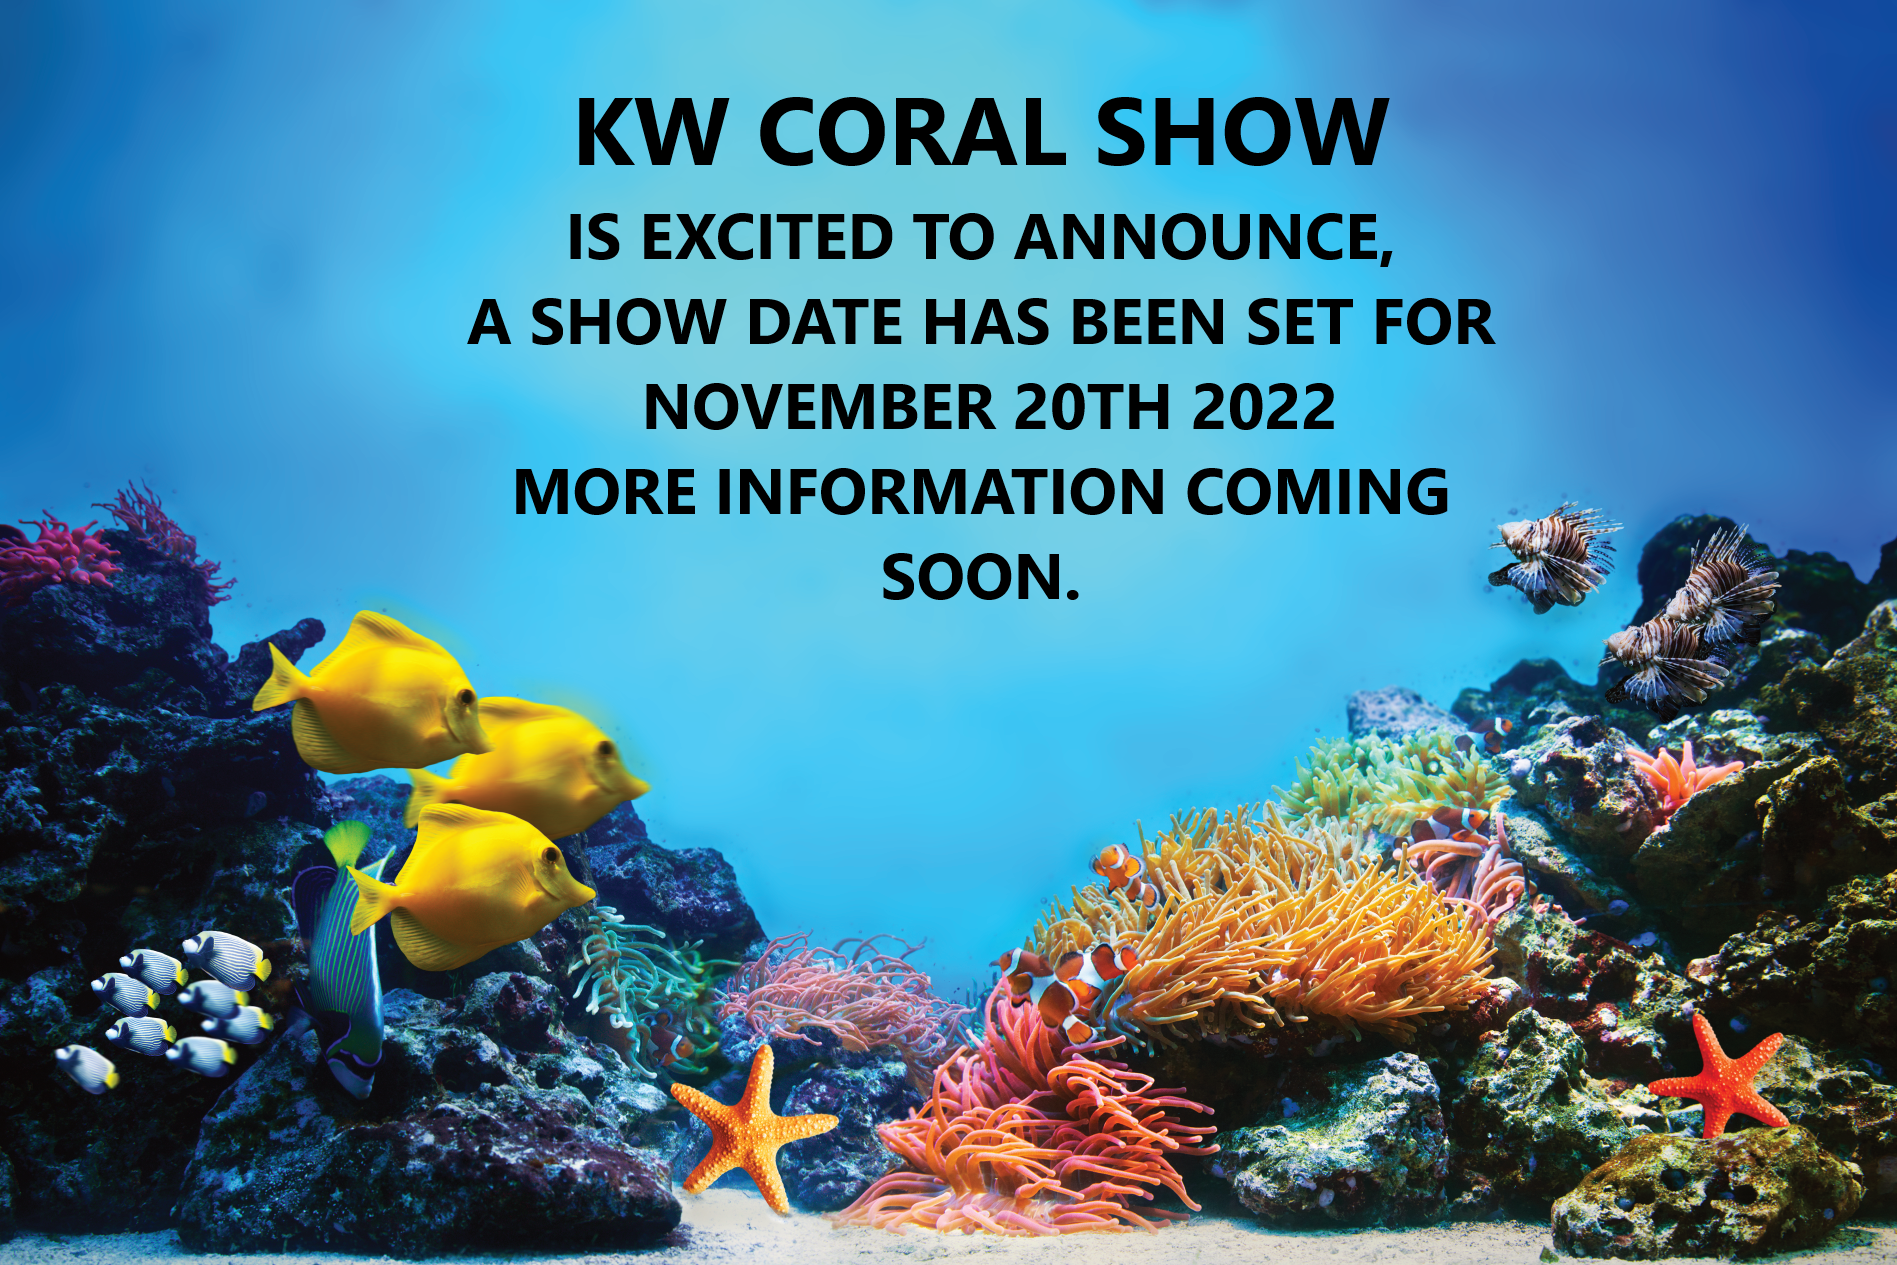 KW CORALSHOW FIRST POST 2022.png